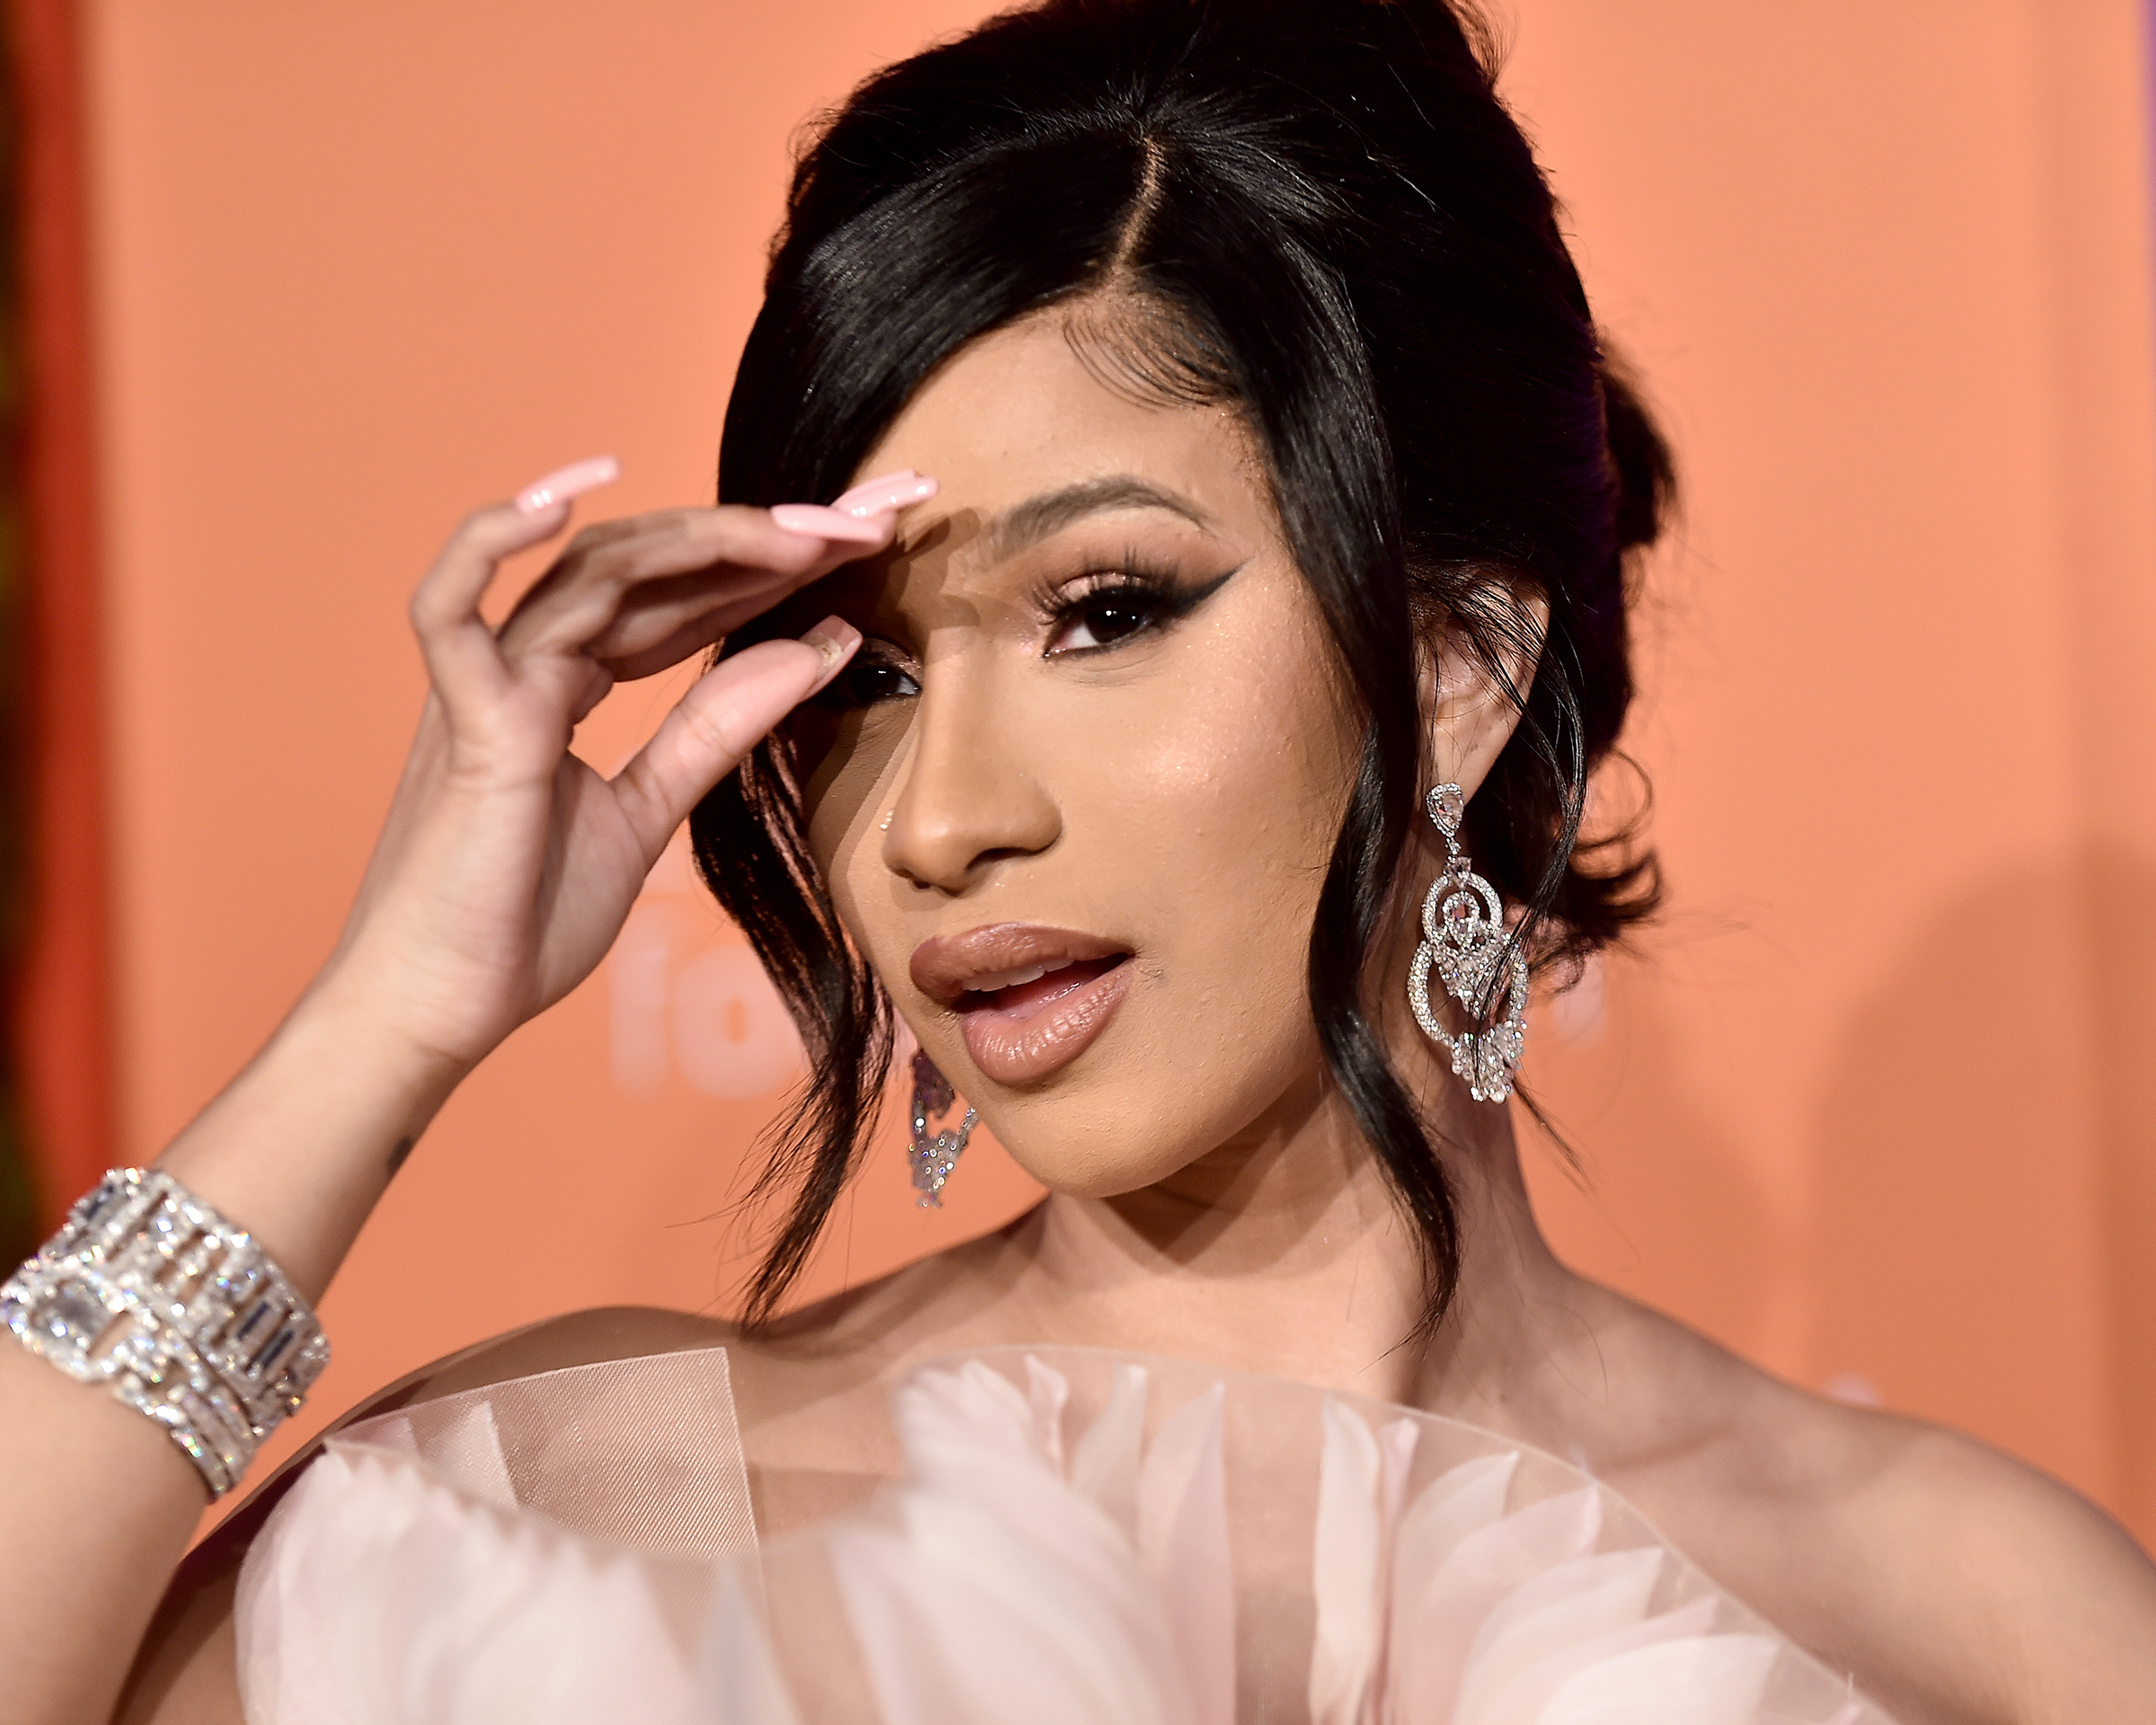 Cardi B red carpet look at Rihanna's 2019 Diamond Ball featuring a stack of diamond bracelets, diamond nose stud, and diamond chandelier earrings with diamond briolettes from Lorraine Schwartz